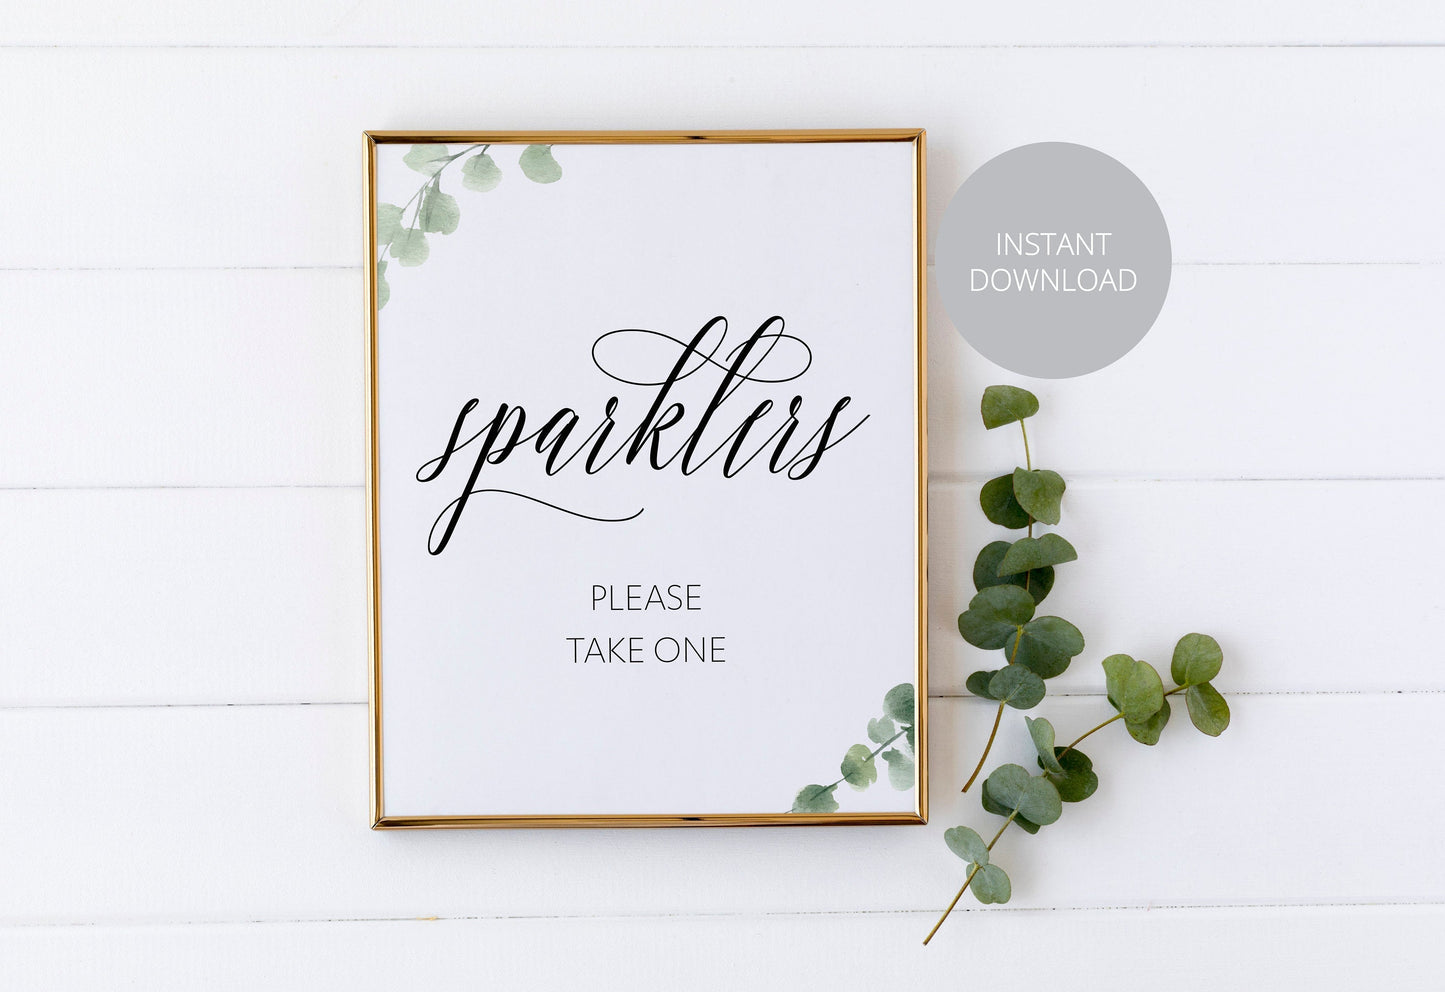 Sparklers Wedding sign, Please Take One,Rustic Wedding, Wedding Signs, Printable, Wedding Decor,Sparkler Send off, Instant Download SIGNS | PHOTO BOOTH SAVVY PAPER CO